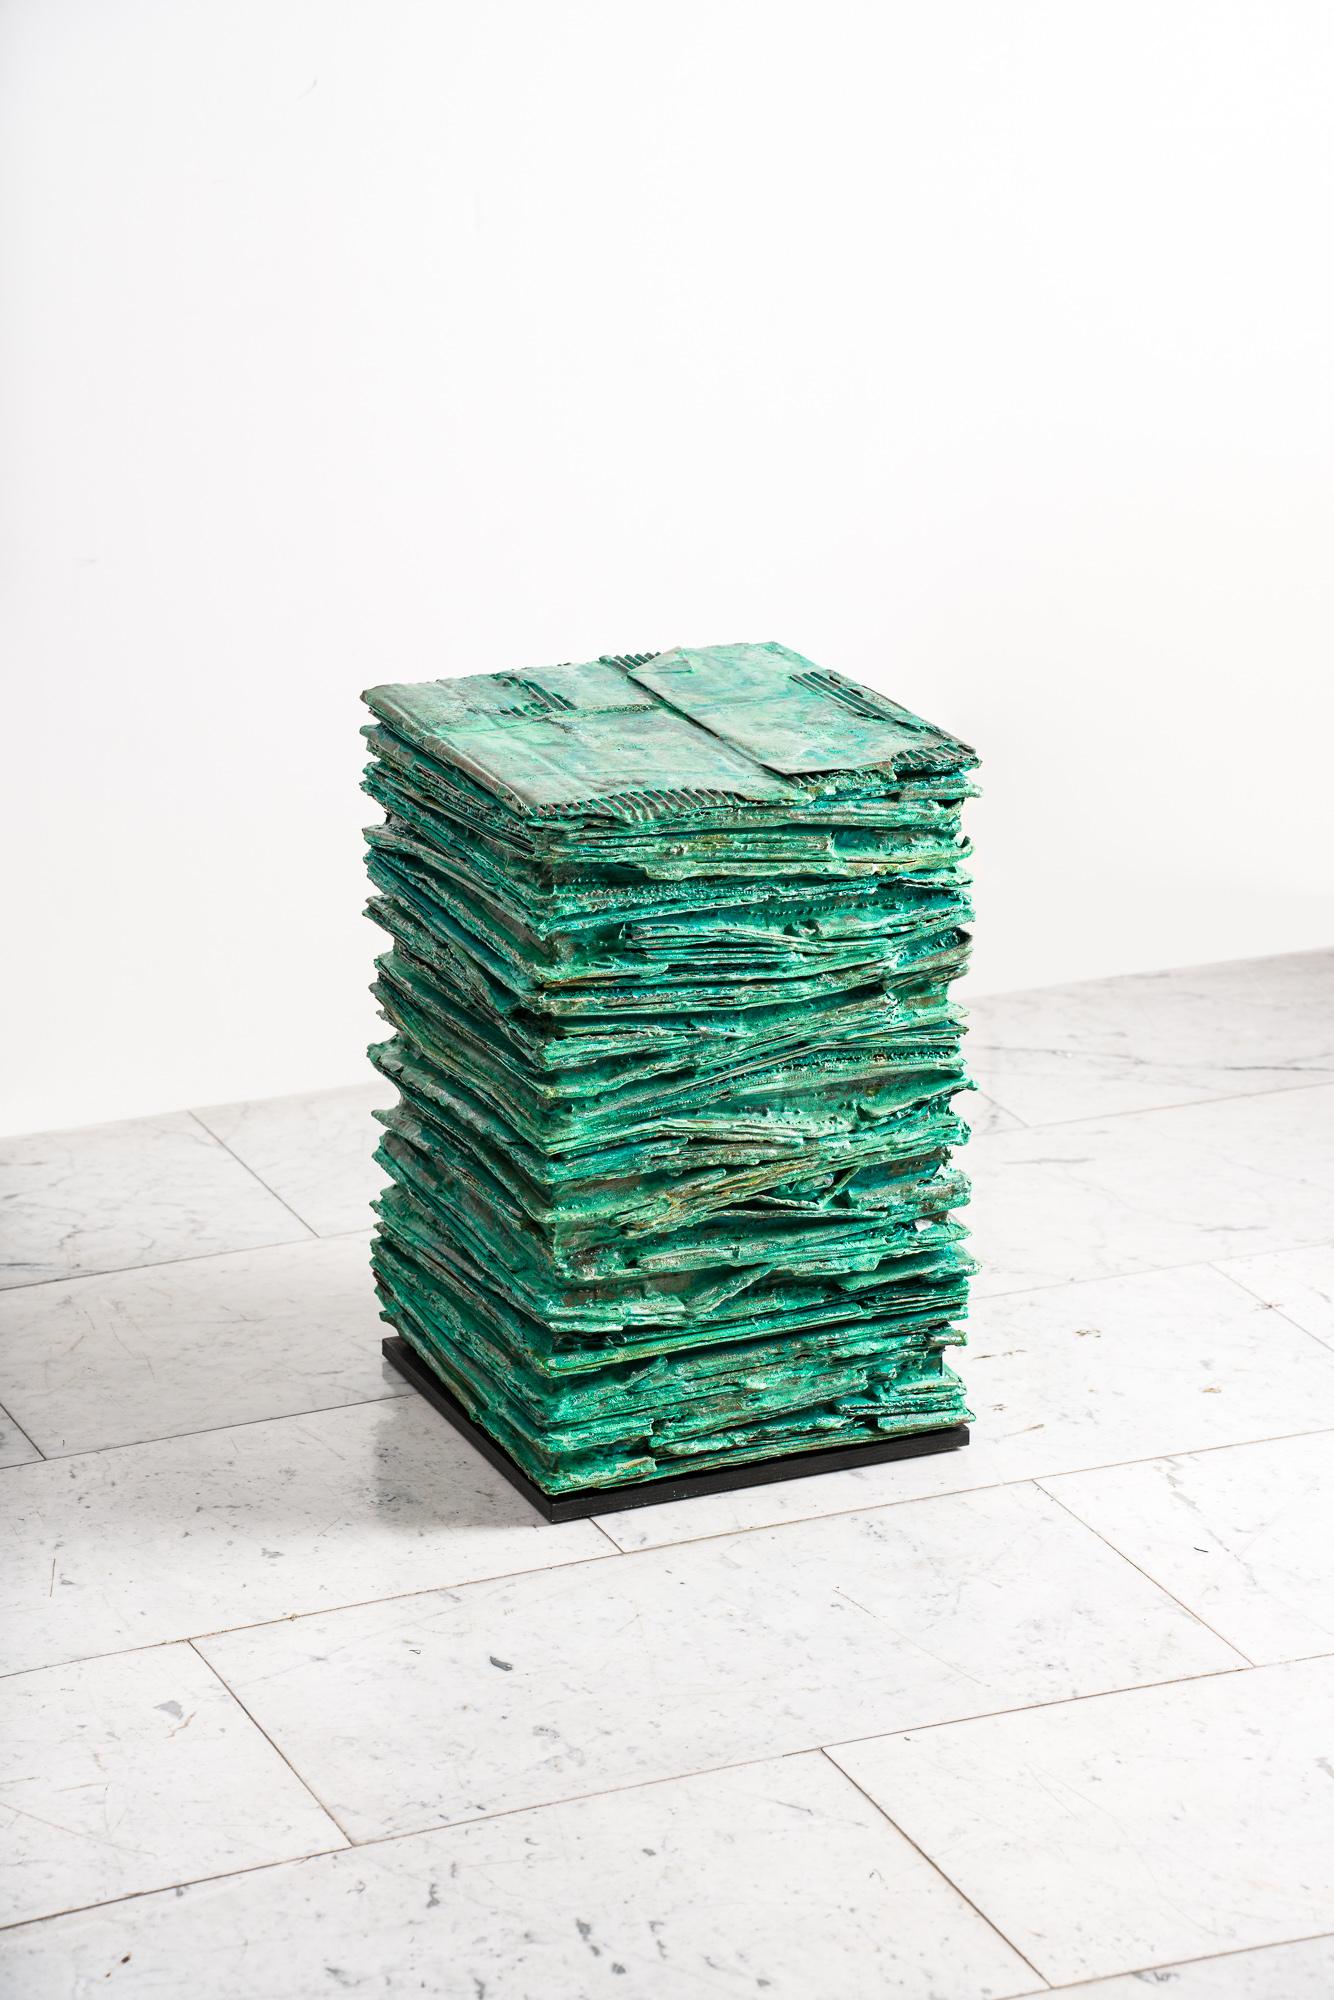 This item features cardboard, paper & resin with applied bronze and verdigris patina satin. Design partners Joseph Cleghorn and Connor Moxam began working together in 2016, developing a reputation for the high level of engineering and craftsmanship